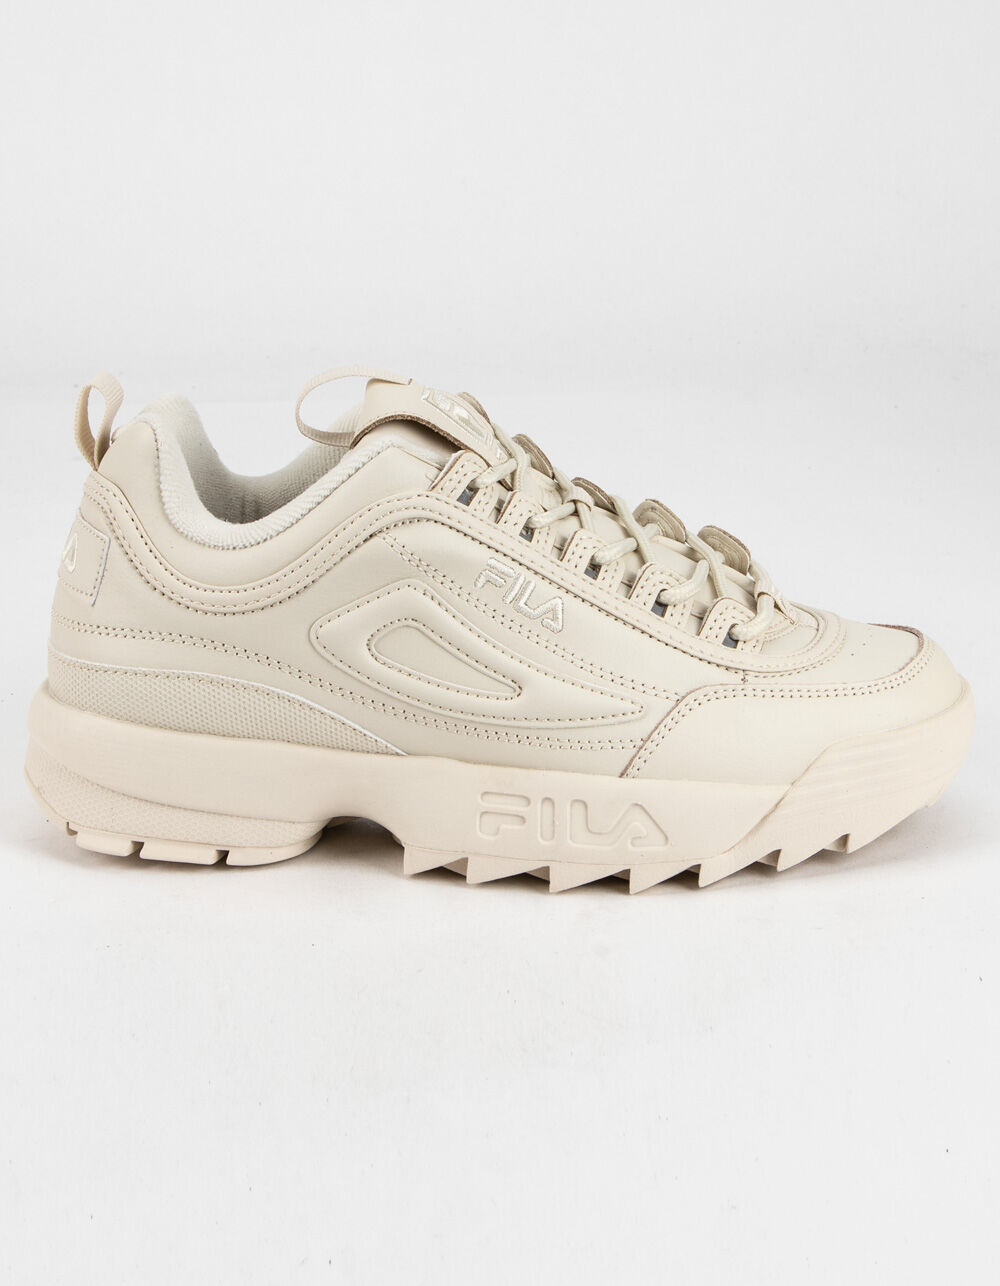 FILA Disruptor II Premium Womens Taupe Shoes - TAUPE | Tillys